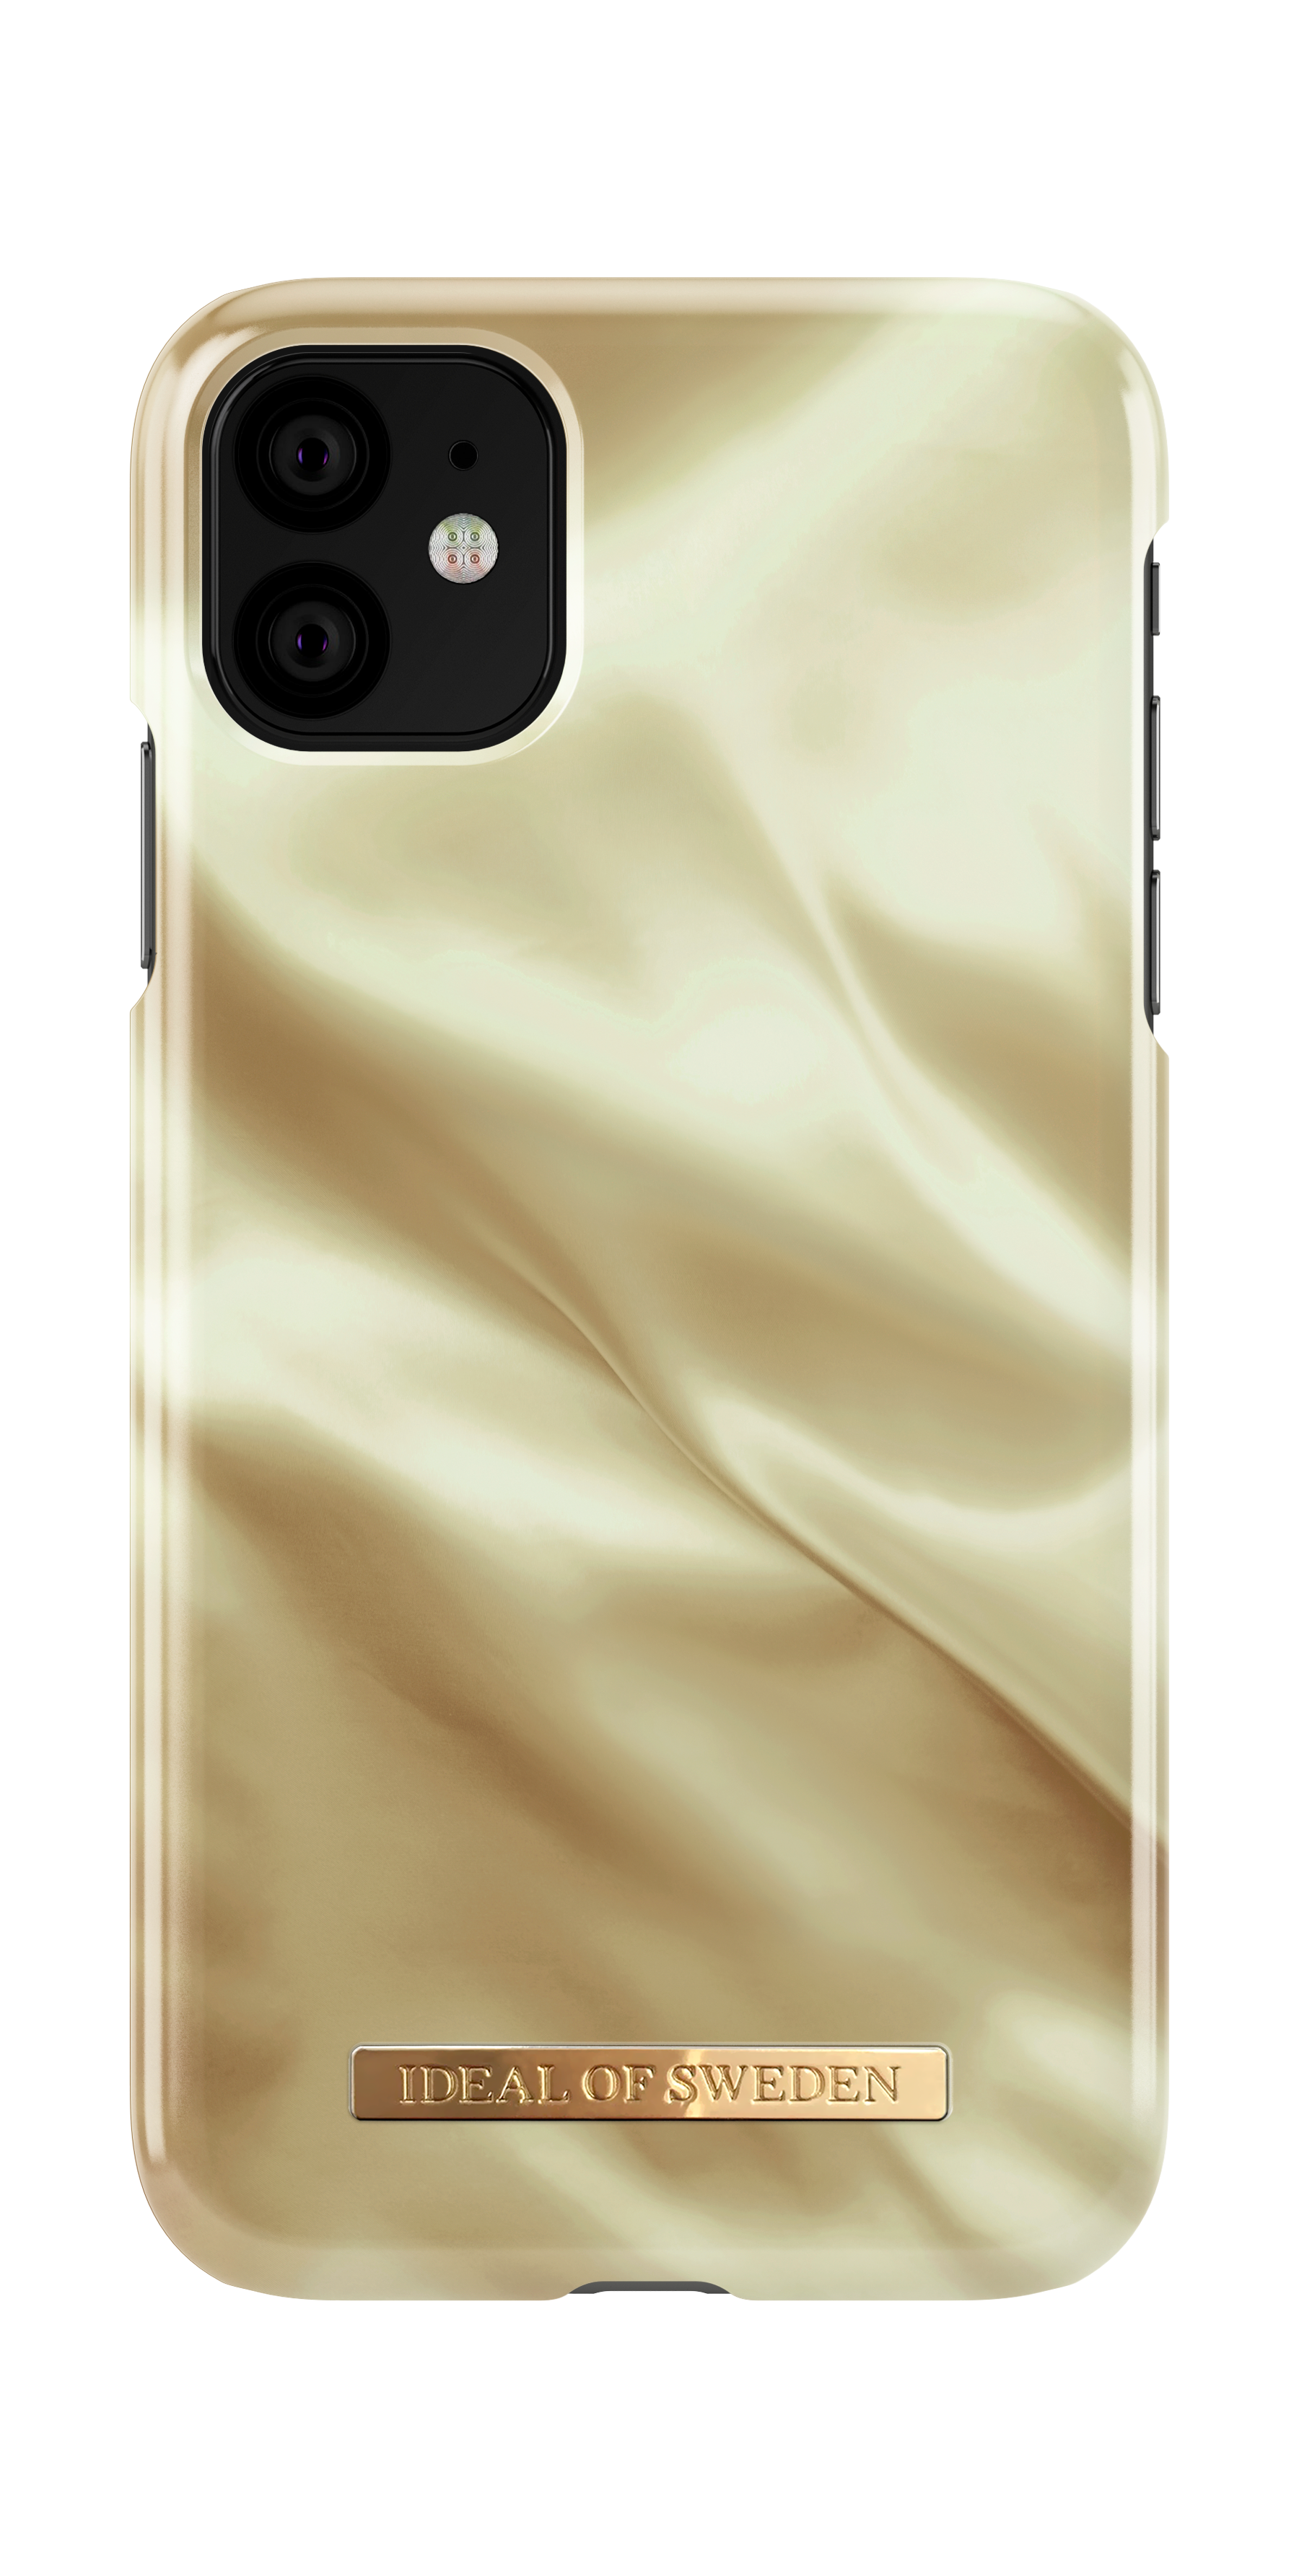 IDEAL OF SWEDEN IDFCSC19-I1961-188, Apple, Honey 11, XR, Satin iPhone iPhone Backcover